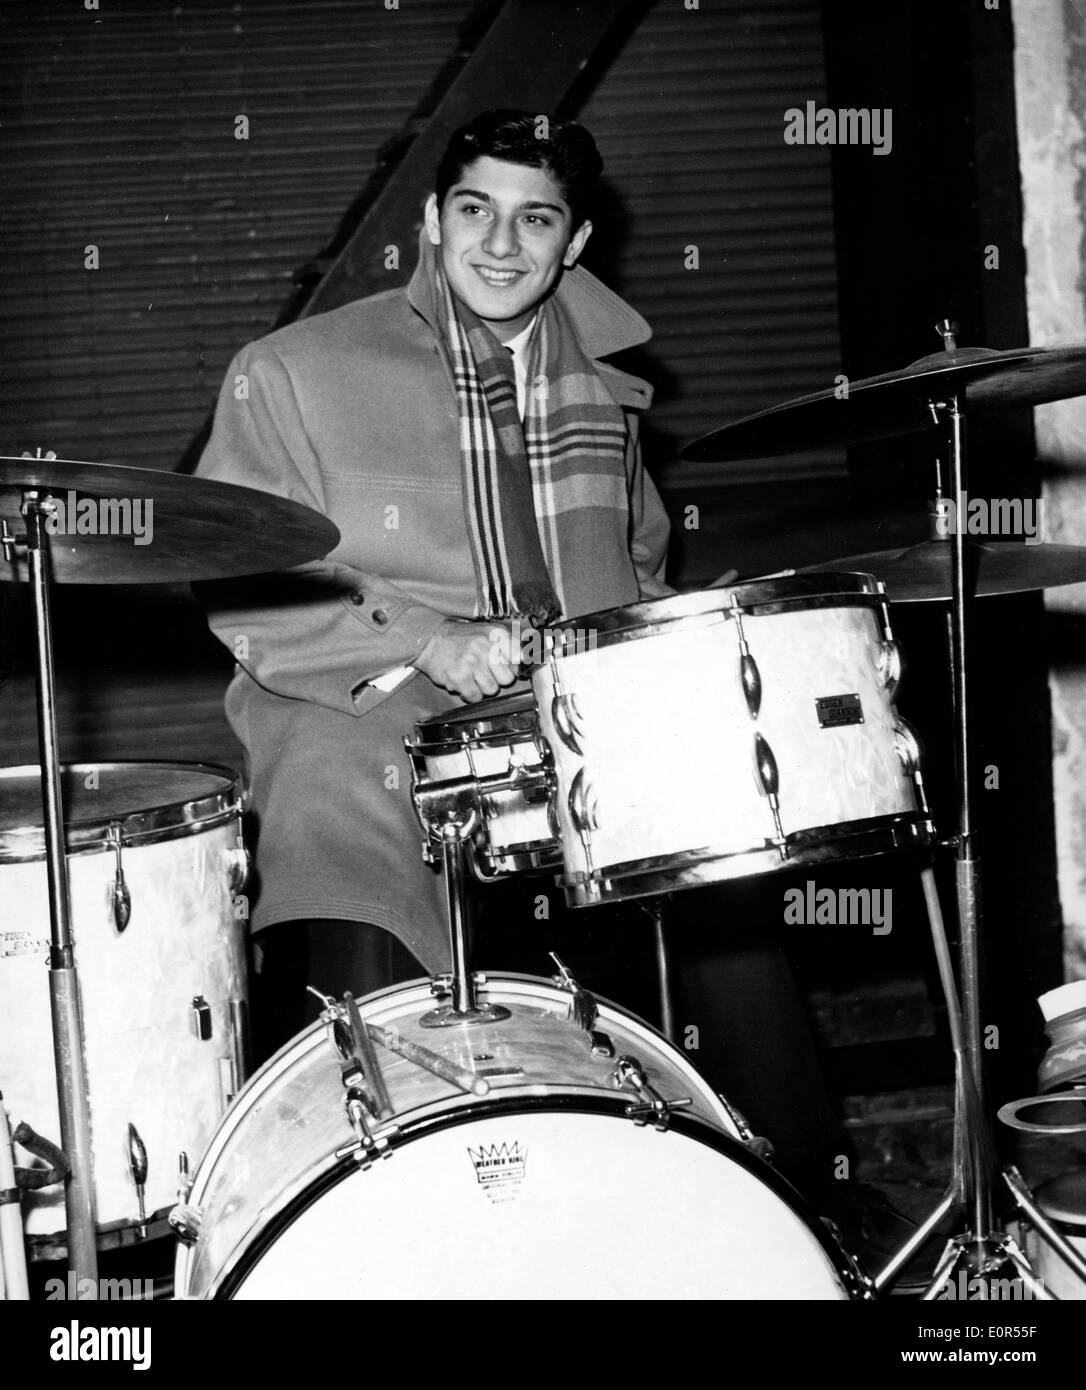 Singer Paul Anka playing the drums Stock Photo